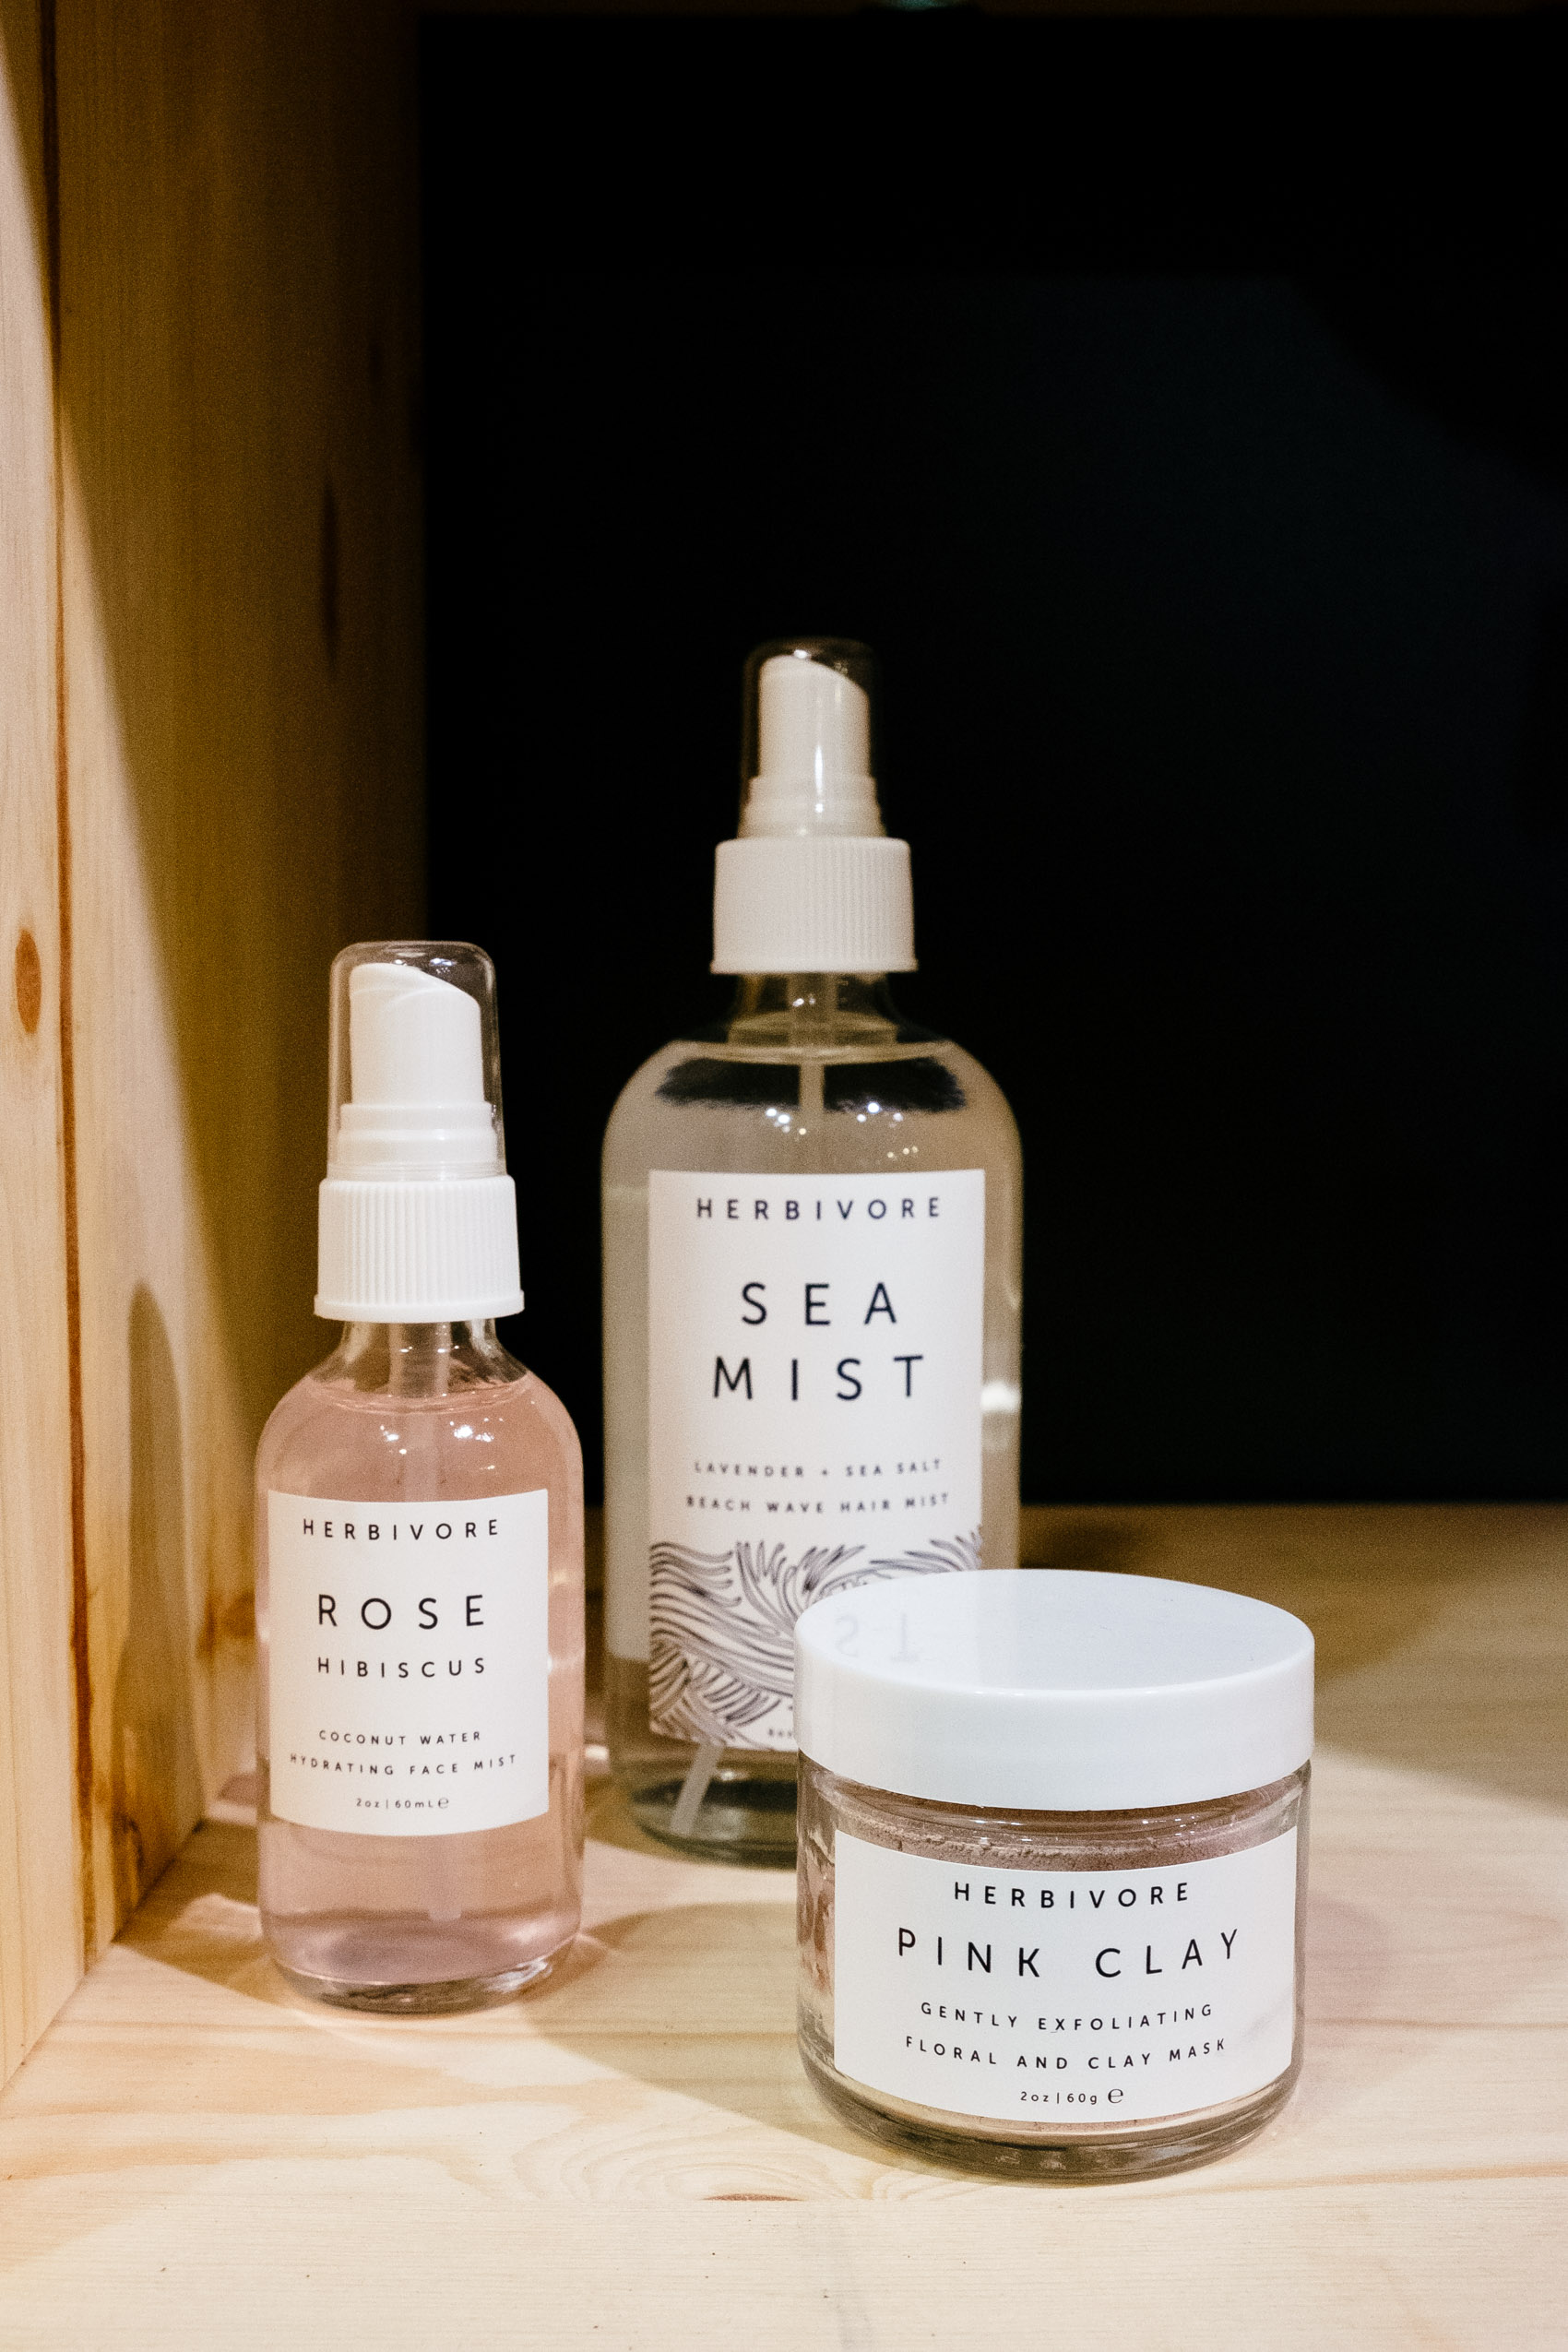 Perfect gifts for her: Herbivore Botanicals Rose Hibiscus Face Mist, Sea Mist Hair Spray and Pink Clay Mask.